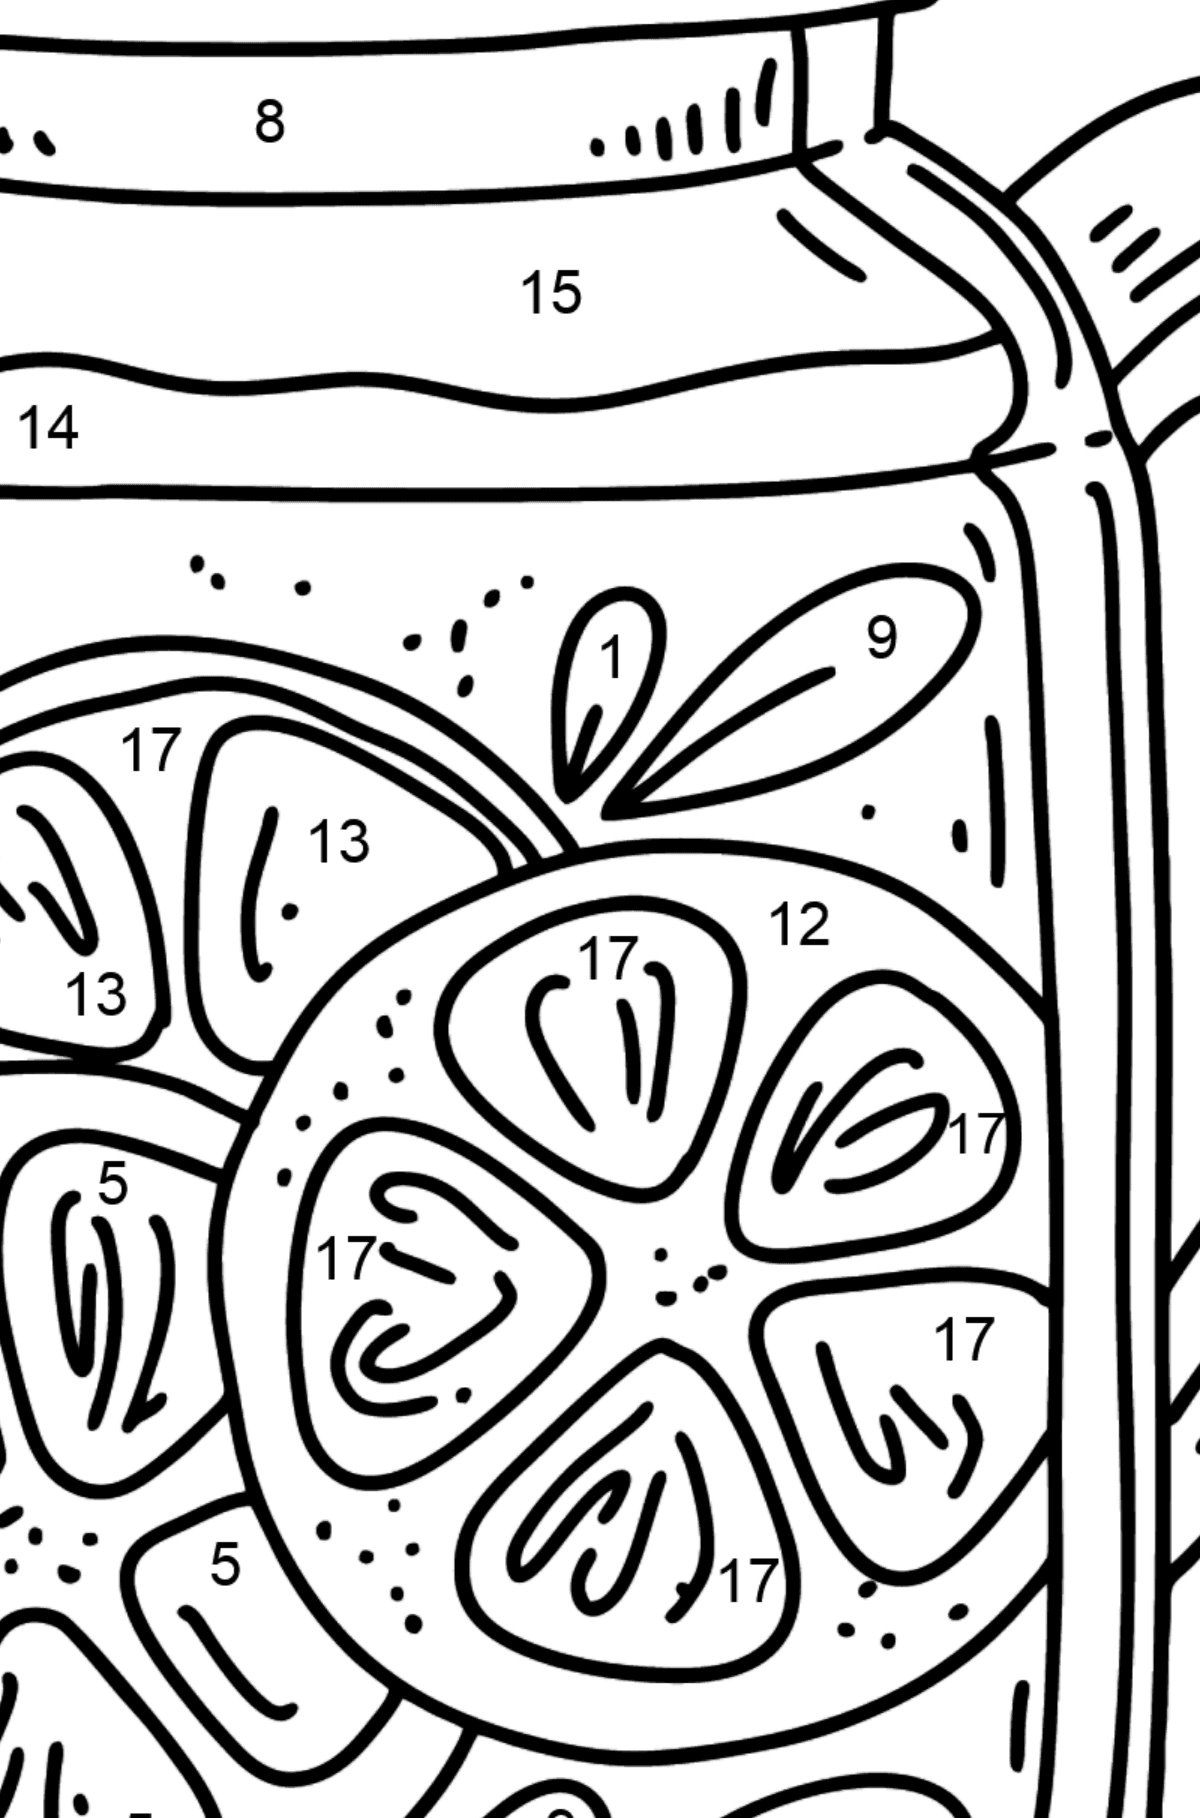 Delicious Lemonade coloring page - Coloring by Numbers for Kids